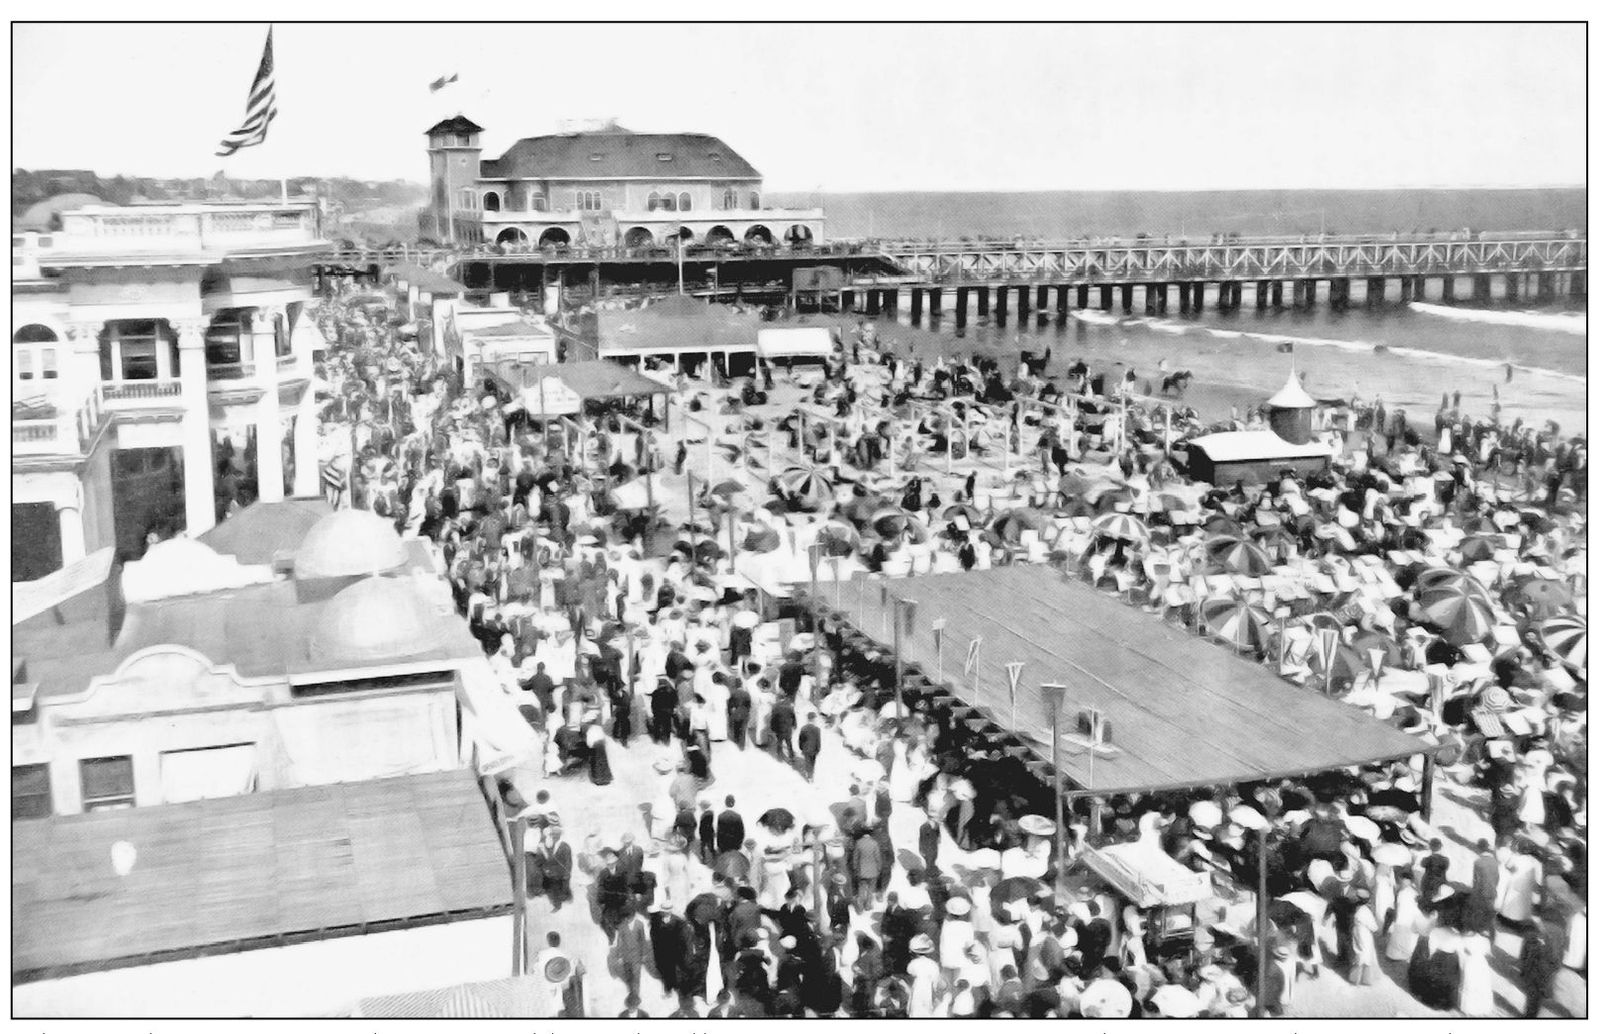 This is the Long Beach Pier and boardwalk in 1909 Tourism was the main - photo 13